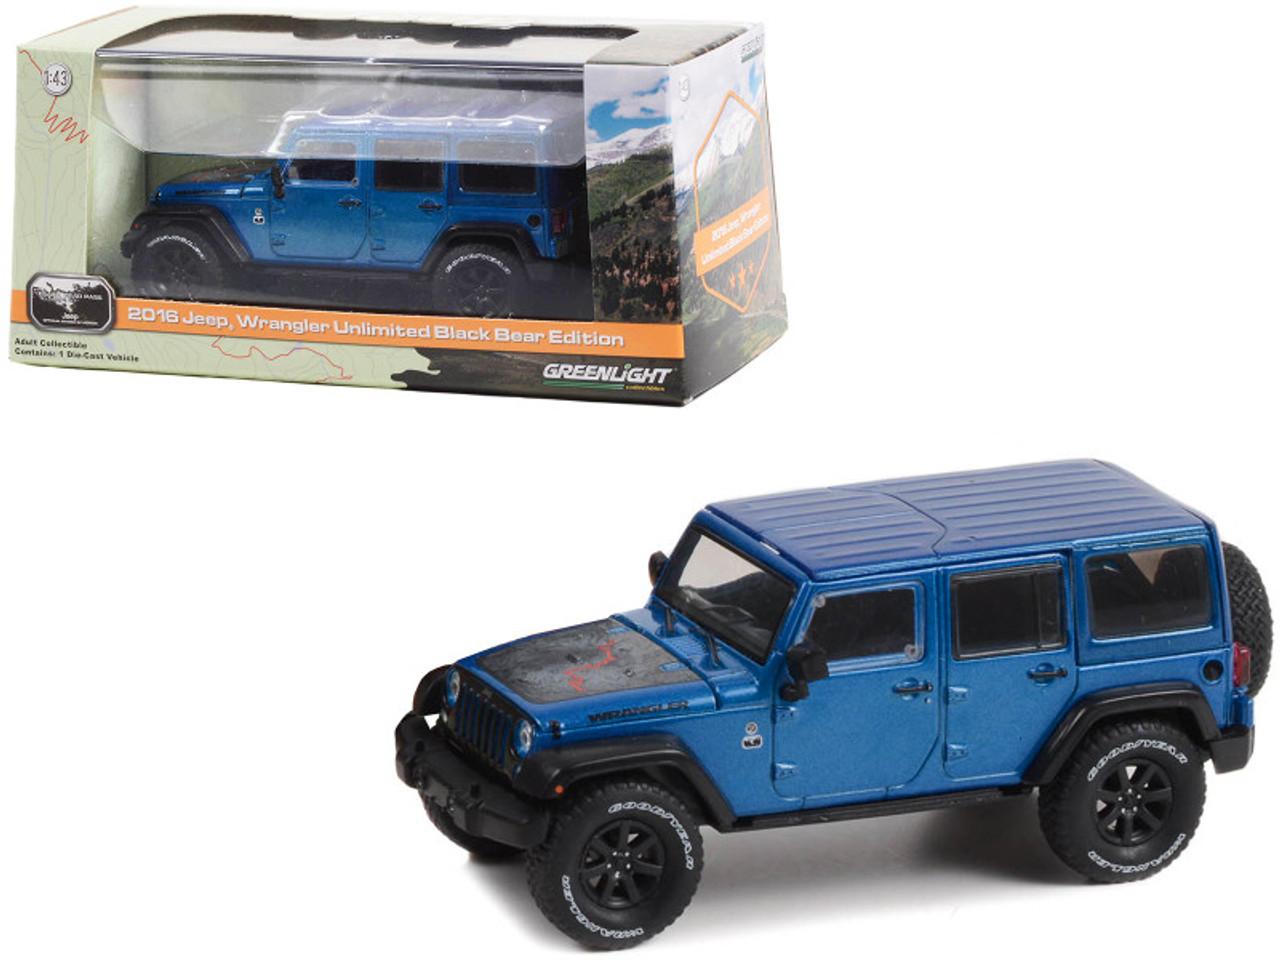 2016 Jeep Wrangler Unlimited Black Bear Edition Hydro Blue Pearl Metallic "Jeep Official Badge of Honor Black Bear Pass Telluride Colorado" 1/43 Diecast Model Car by Greenlight